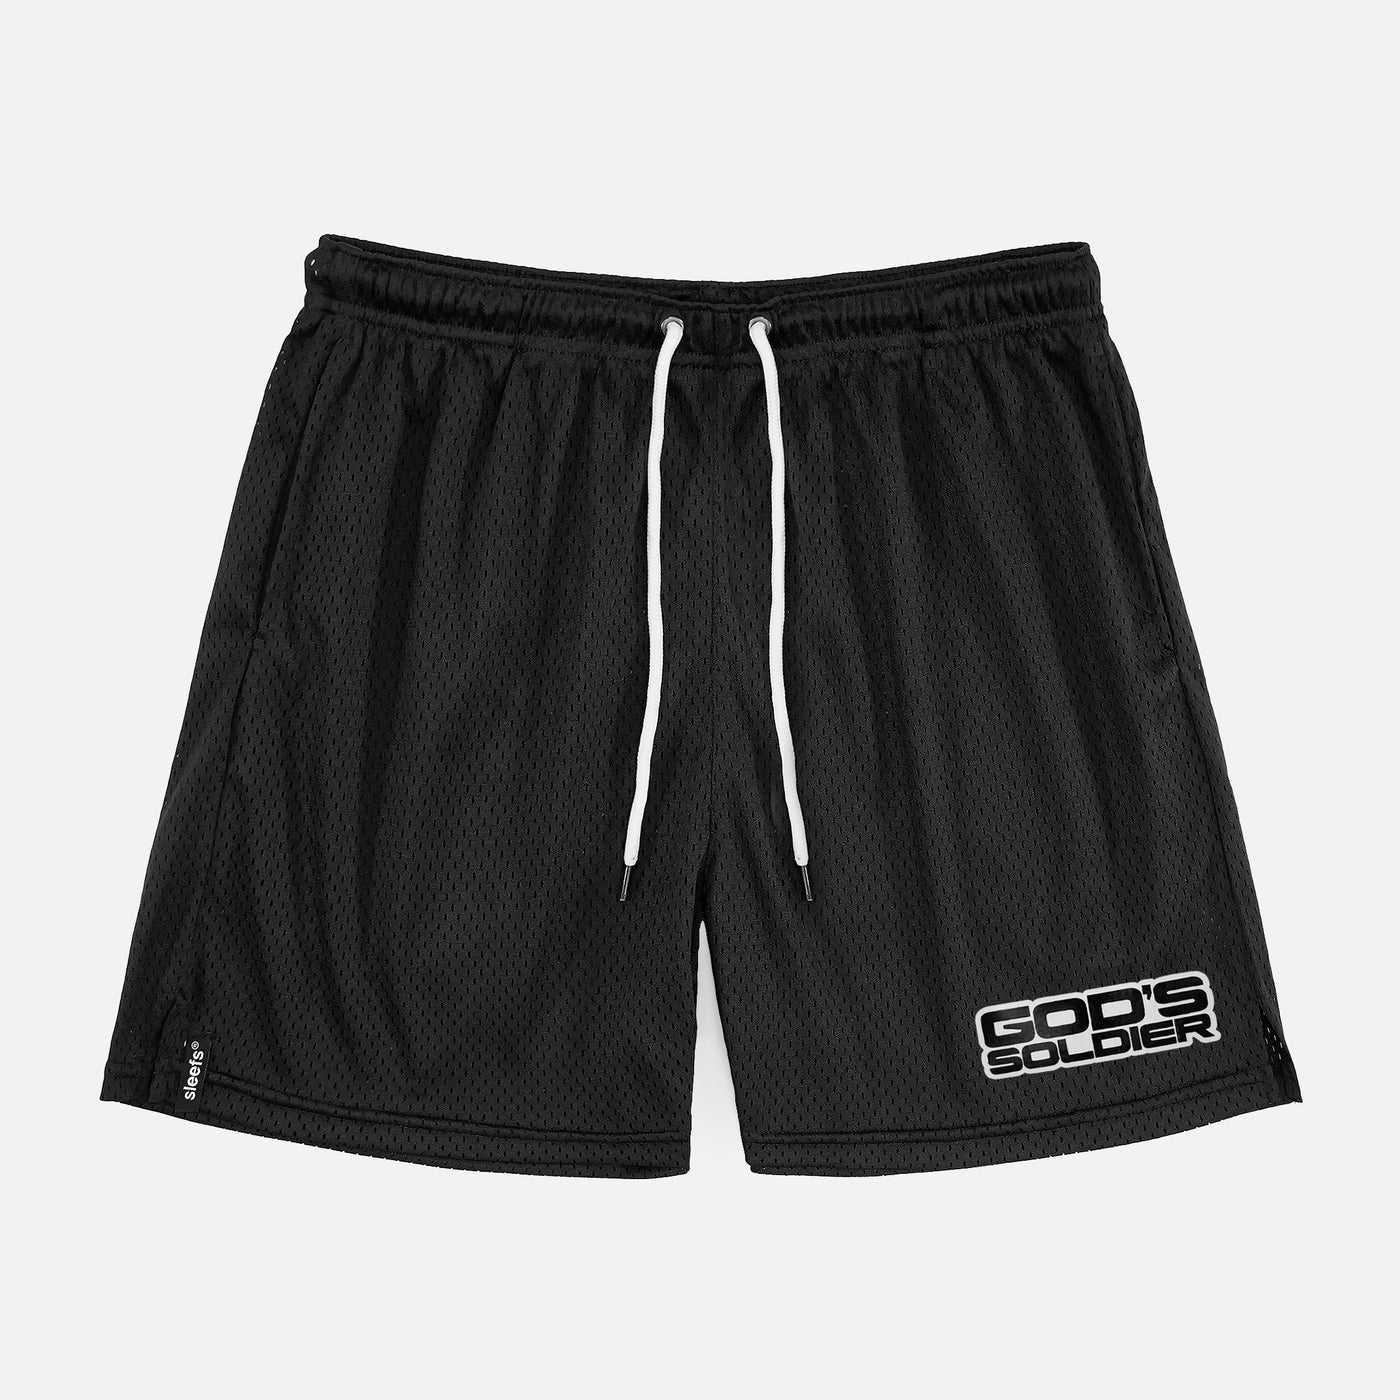 God's Soldier Patch Shorts - 7"